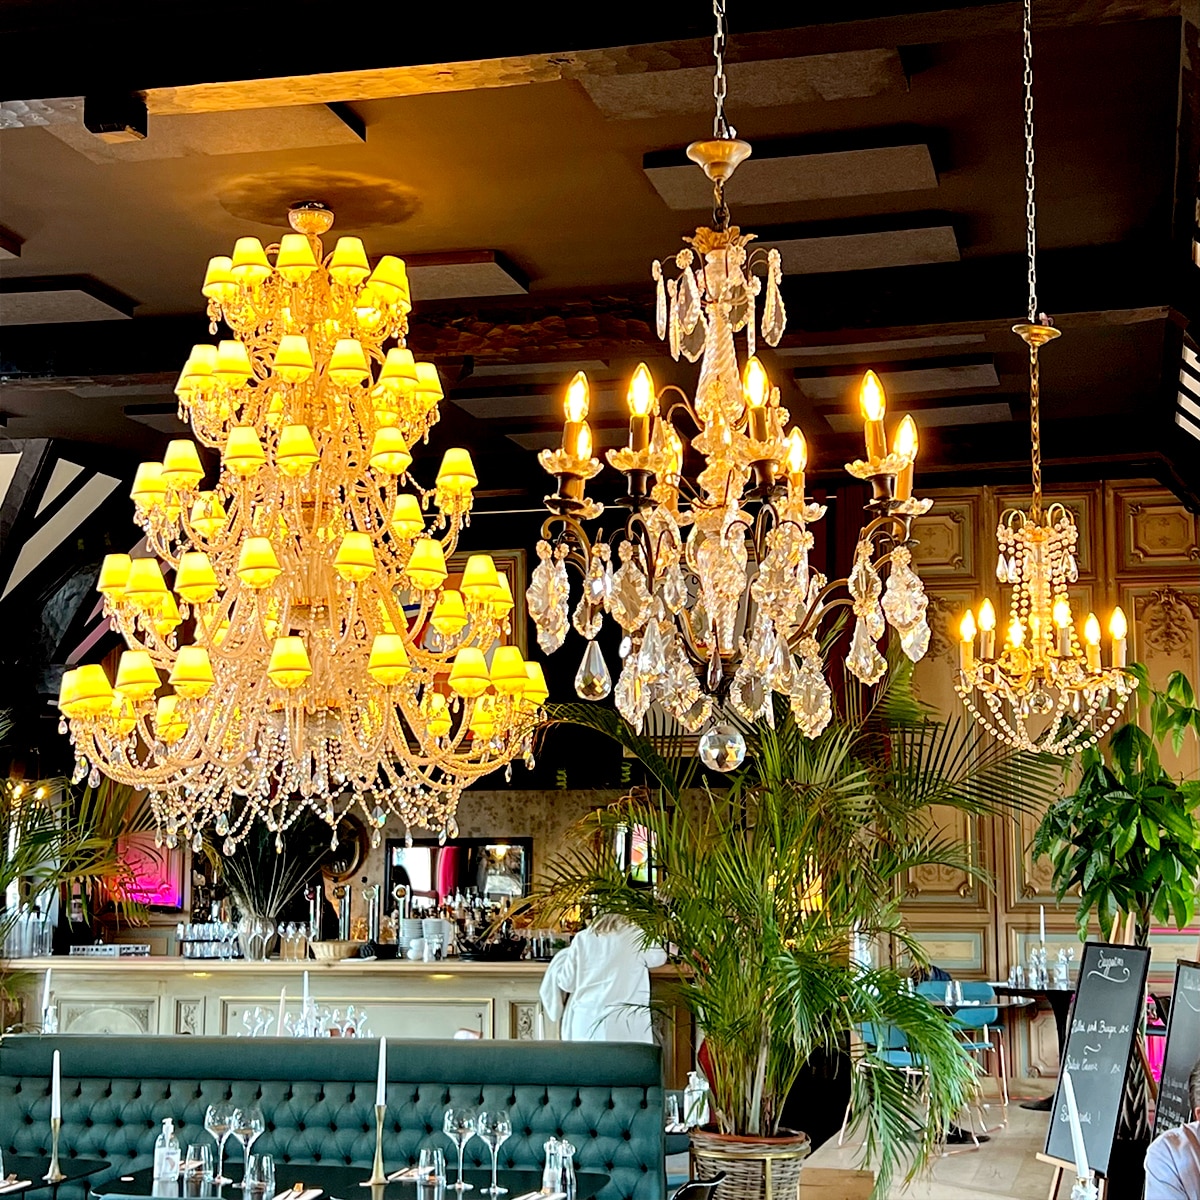 The advantage of a chandelier restaurant